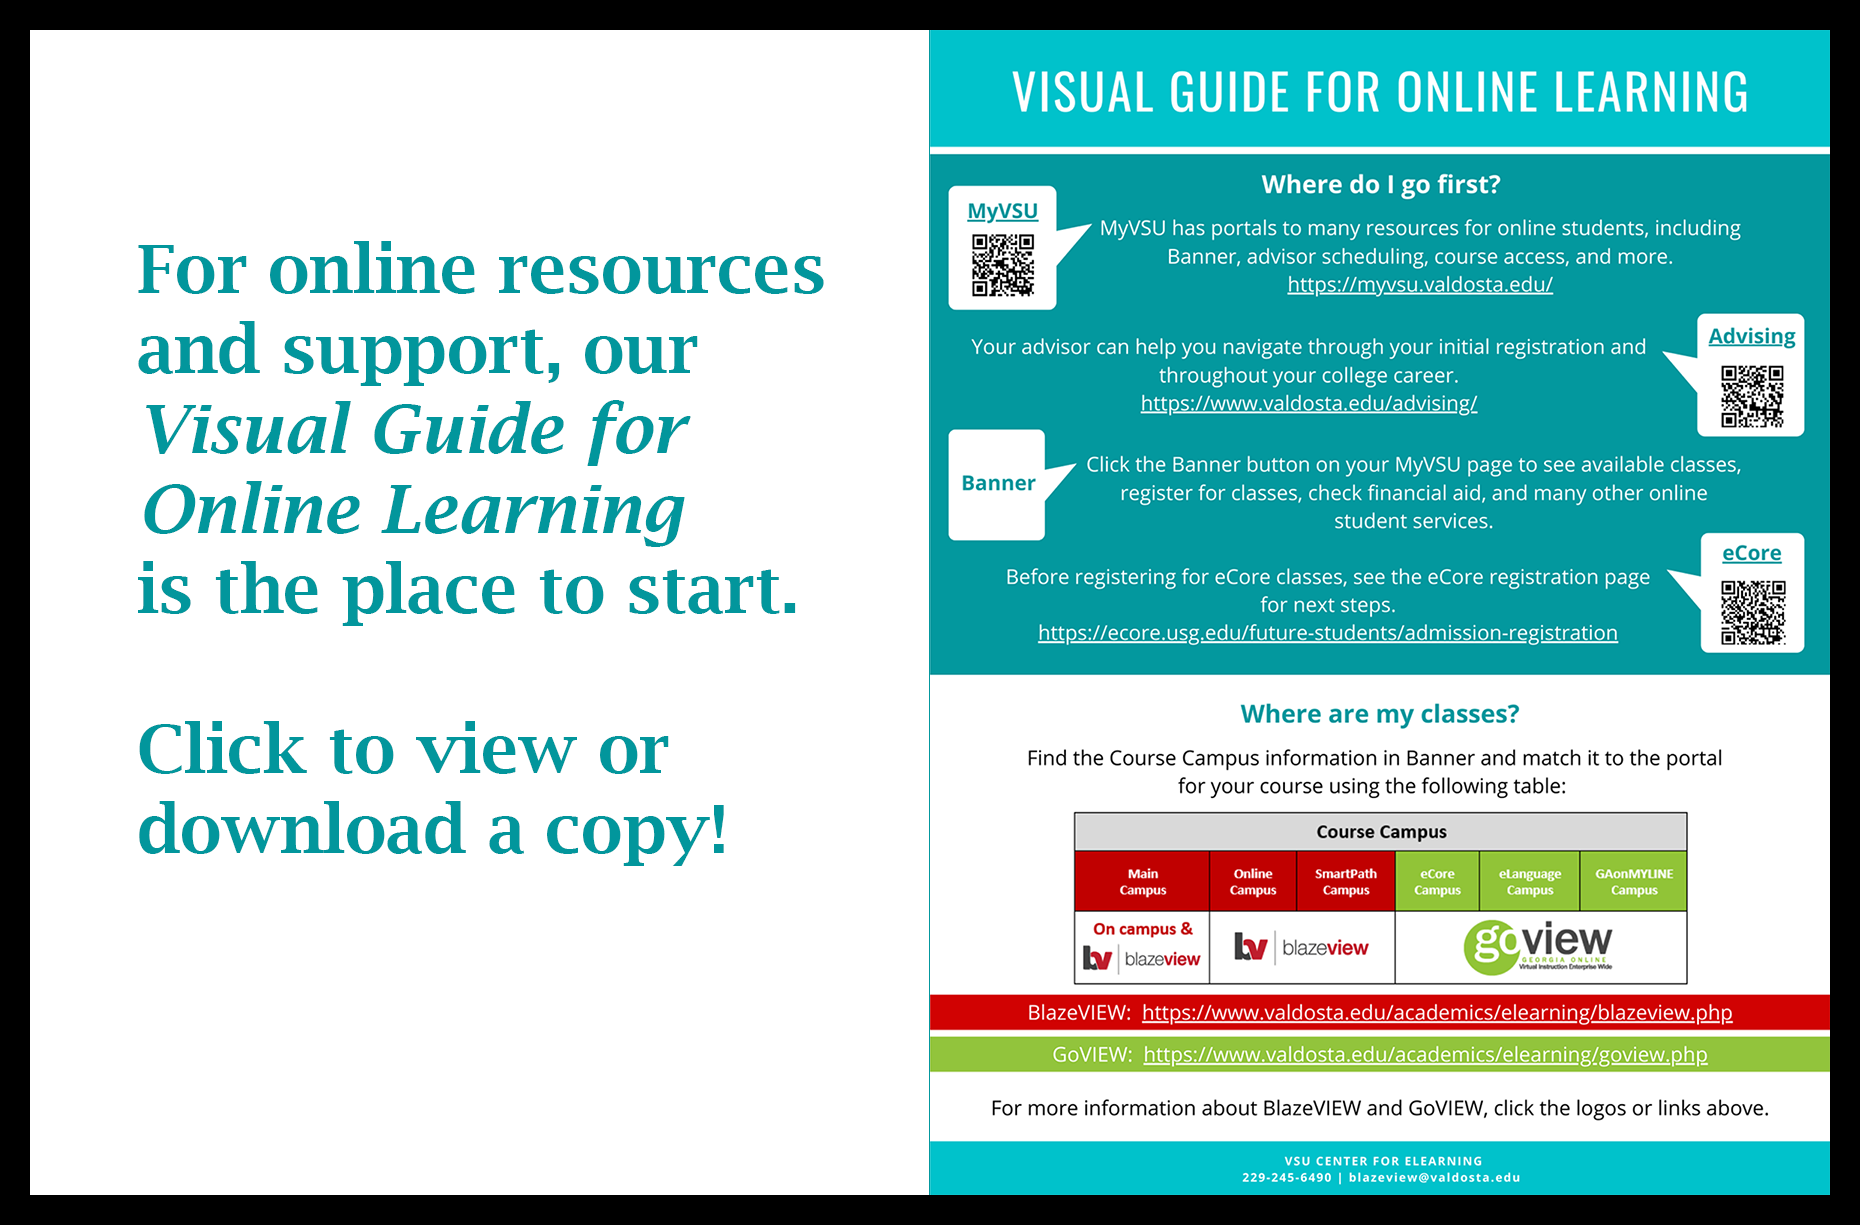 Visual Guide for Online Learning image